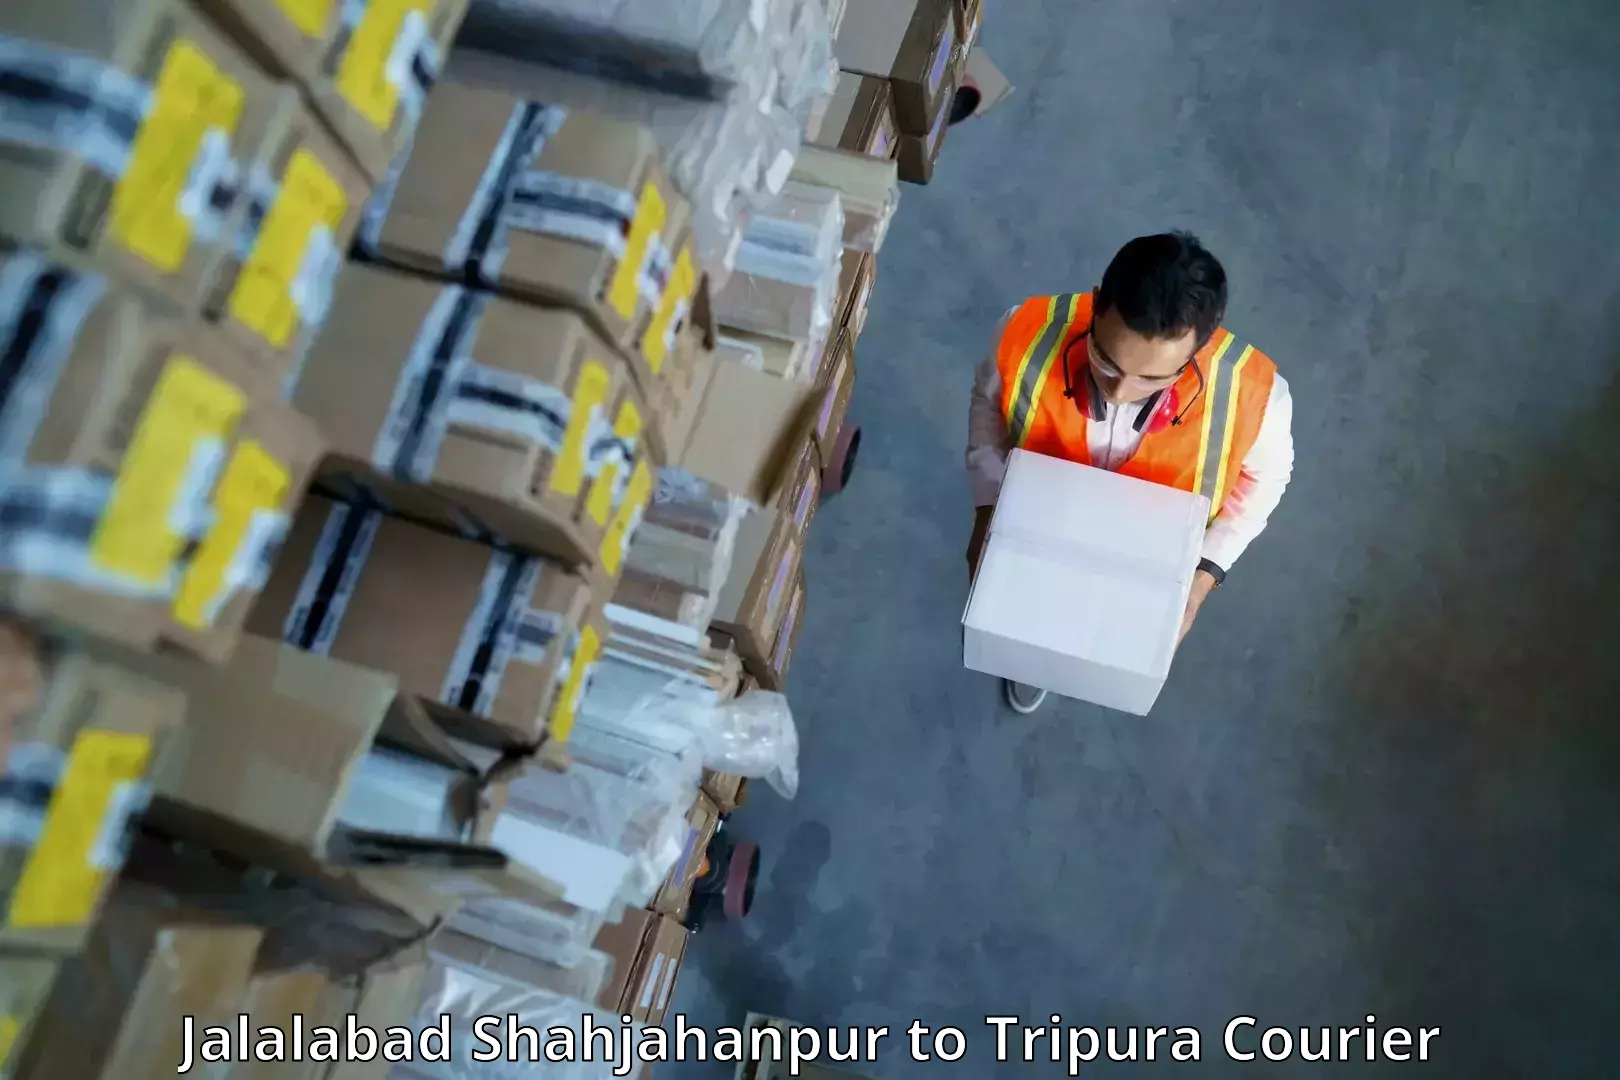 Pharmaceutical courier Jalalabad Shahjahanpur to Khowai